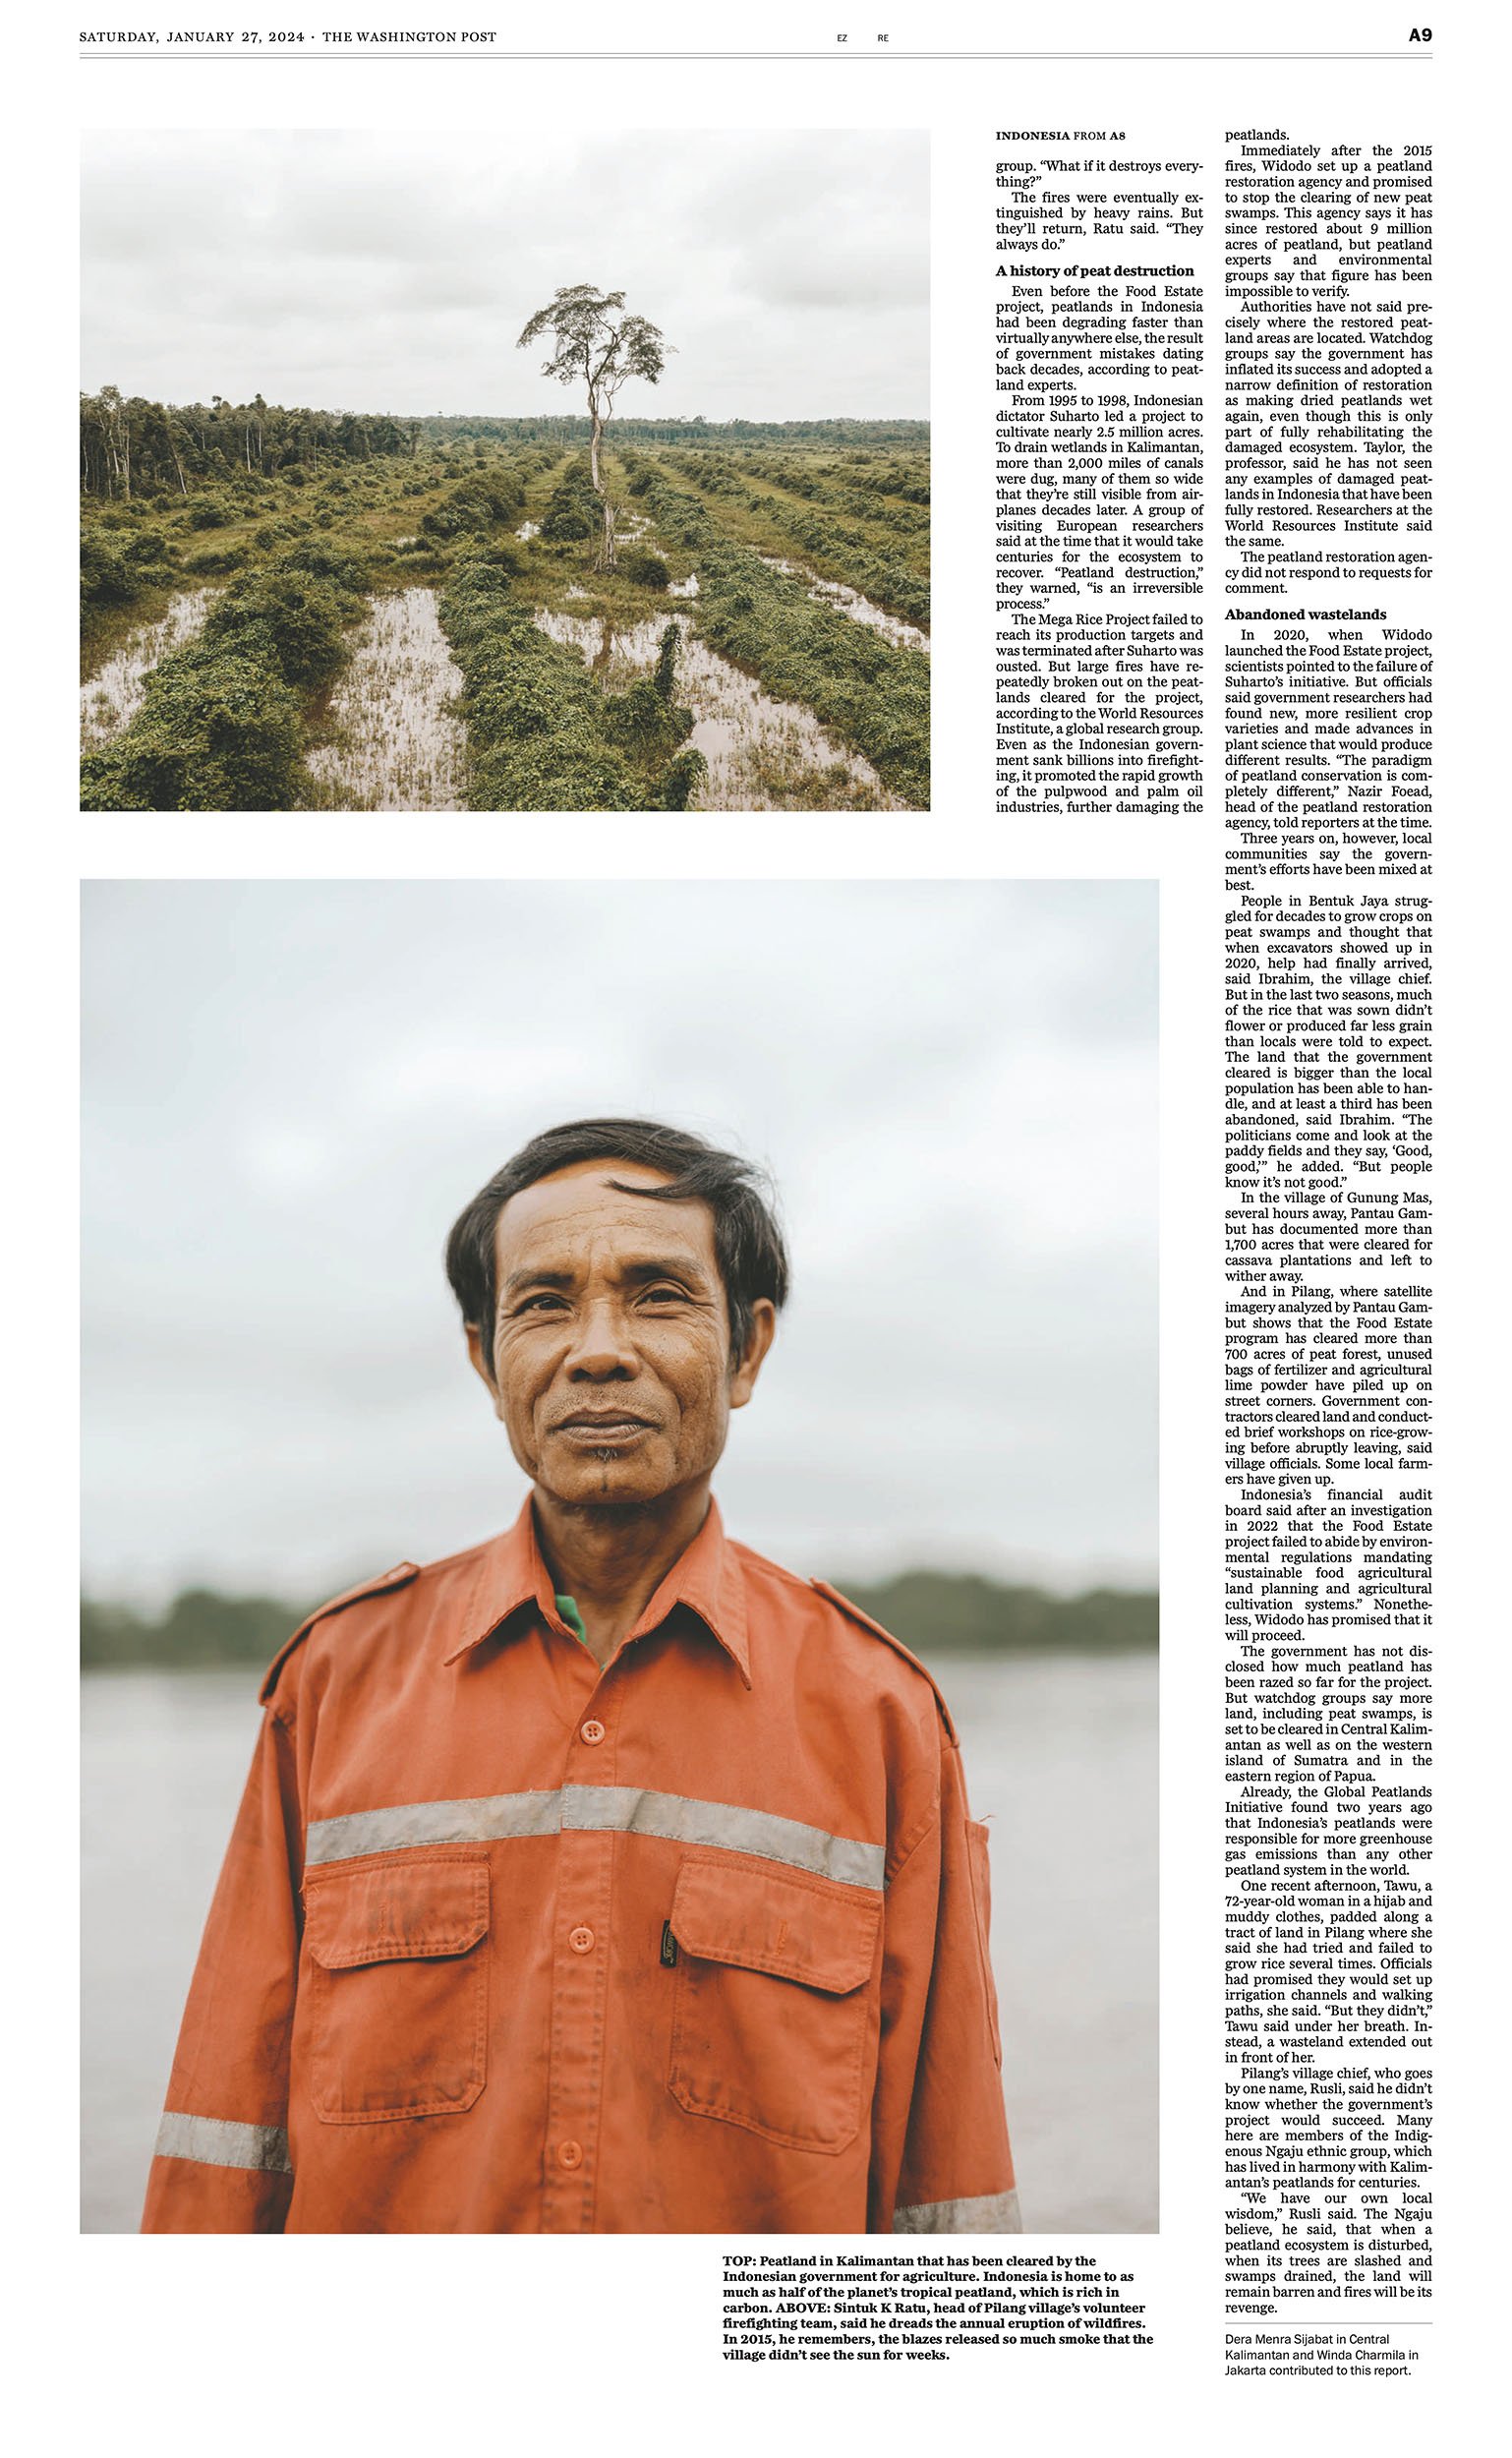  Indonesia Food Estate and Peat Swamp Destruction in The Washington Post, January 2024 